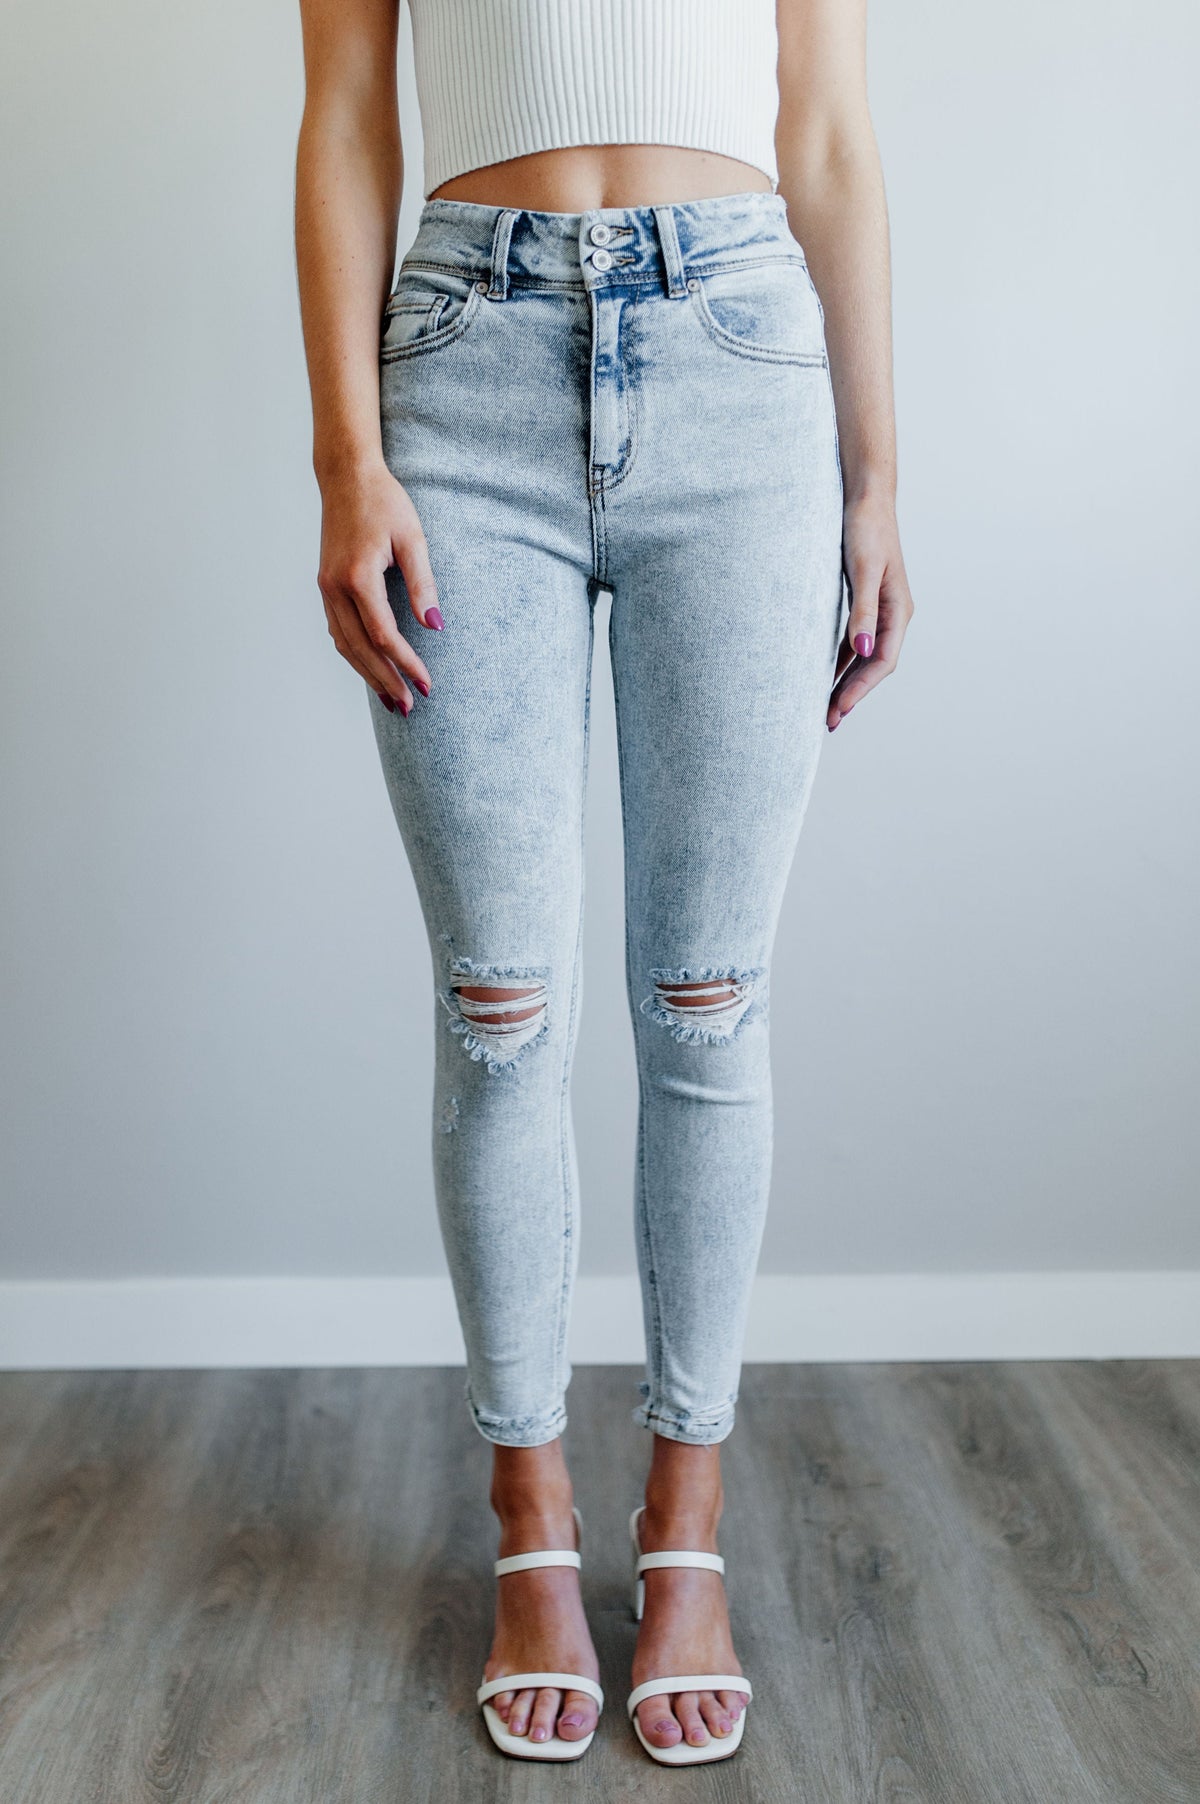 Pictured is a trendy high rise, denim jean with updated acid-wash material, light distressing, and cropped ankle.